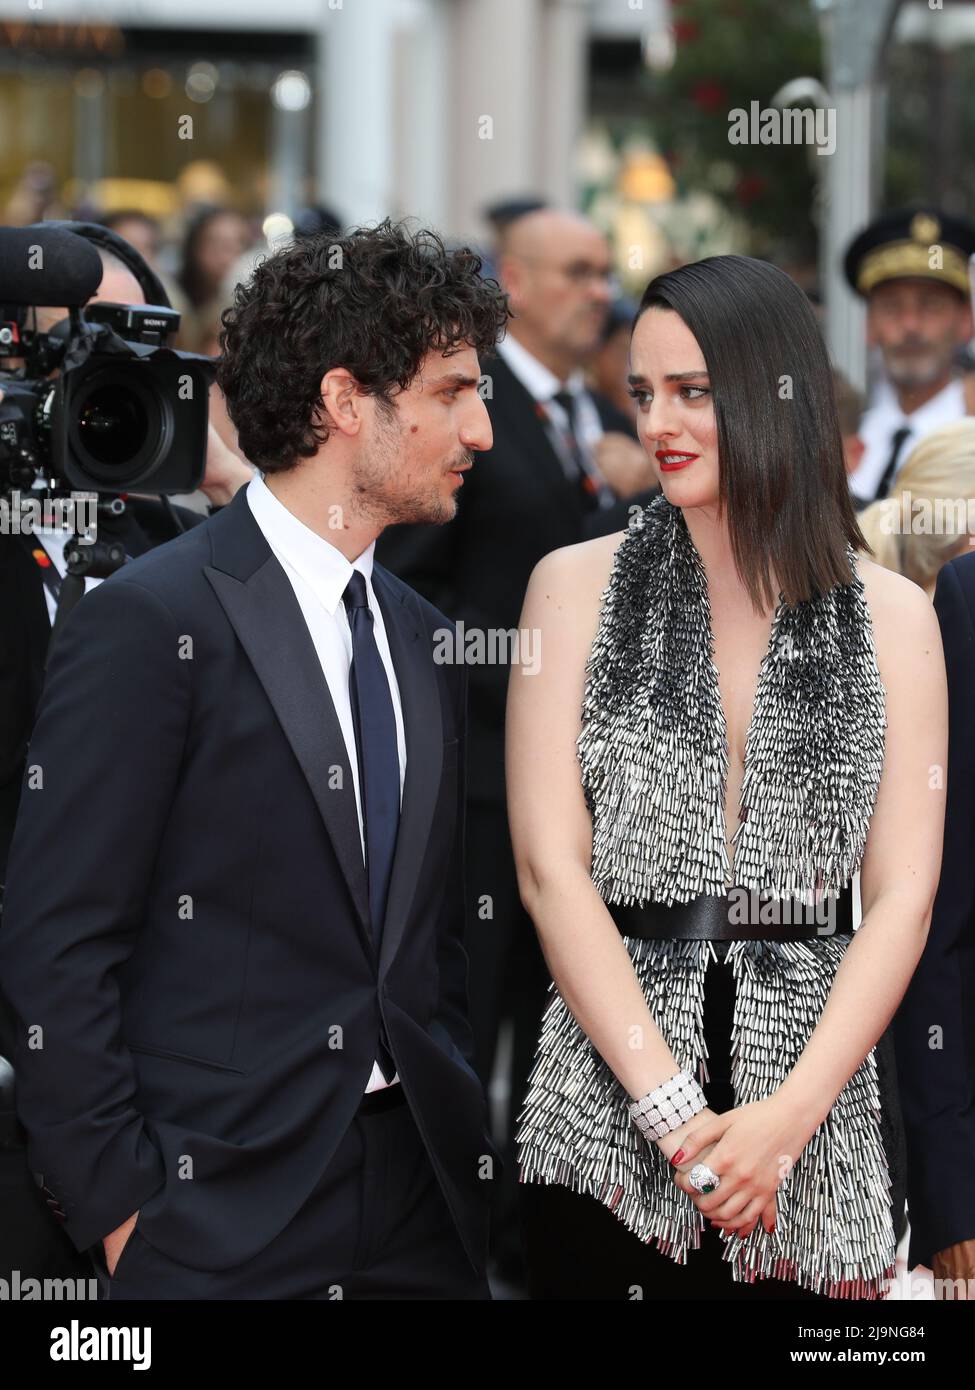 May 25, 2022, Cannes, Cote d'Azur, France: LOUIS GARREL and NOEMIE